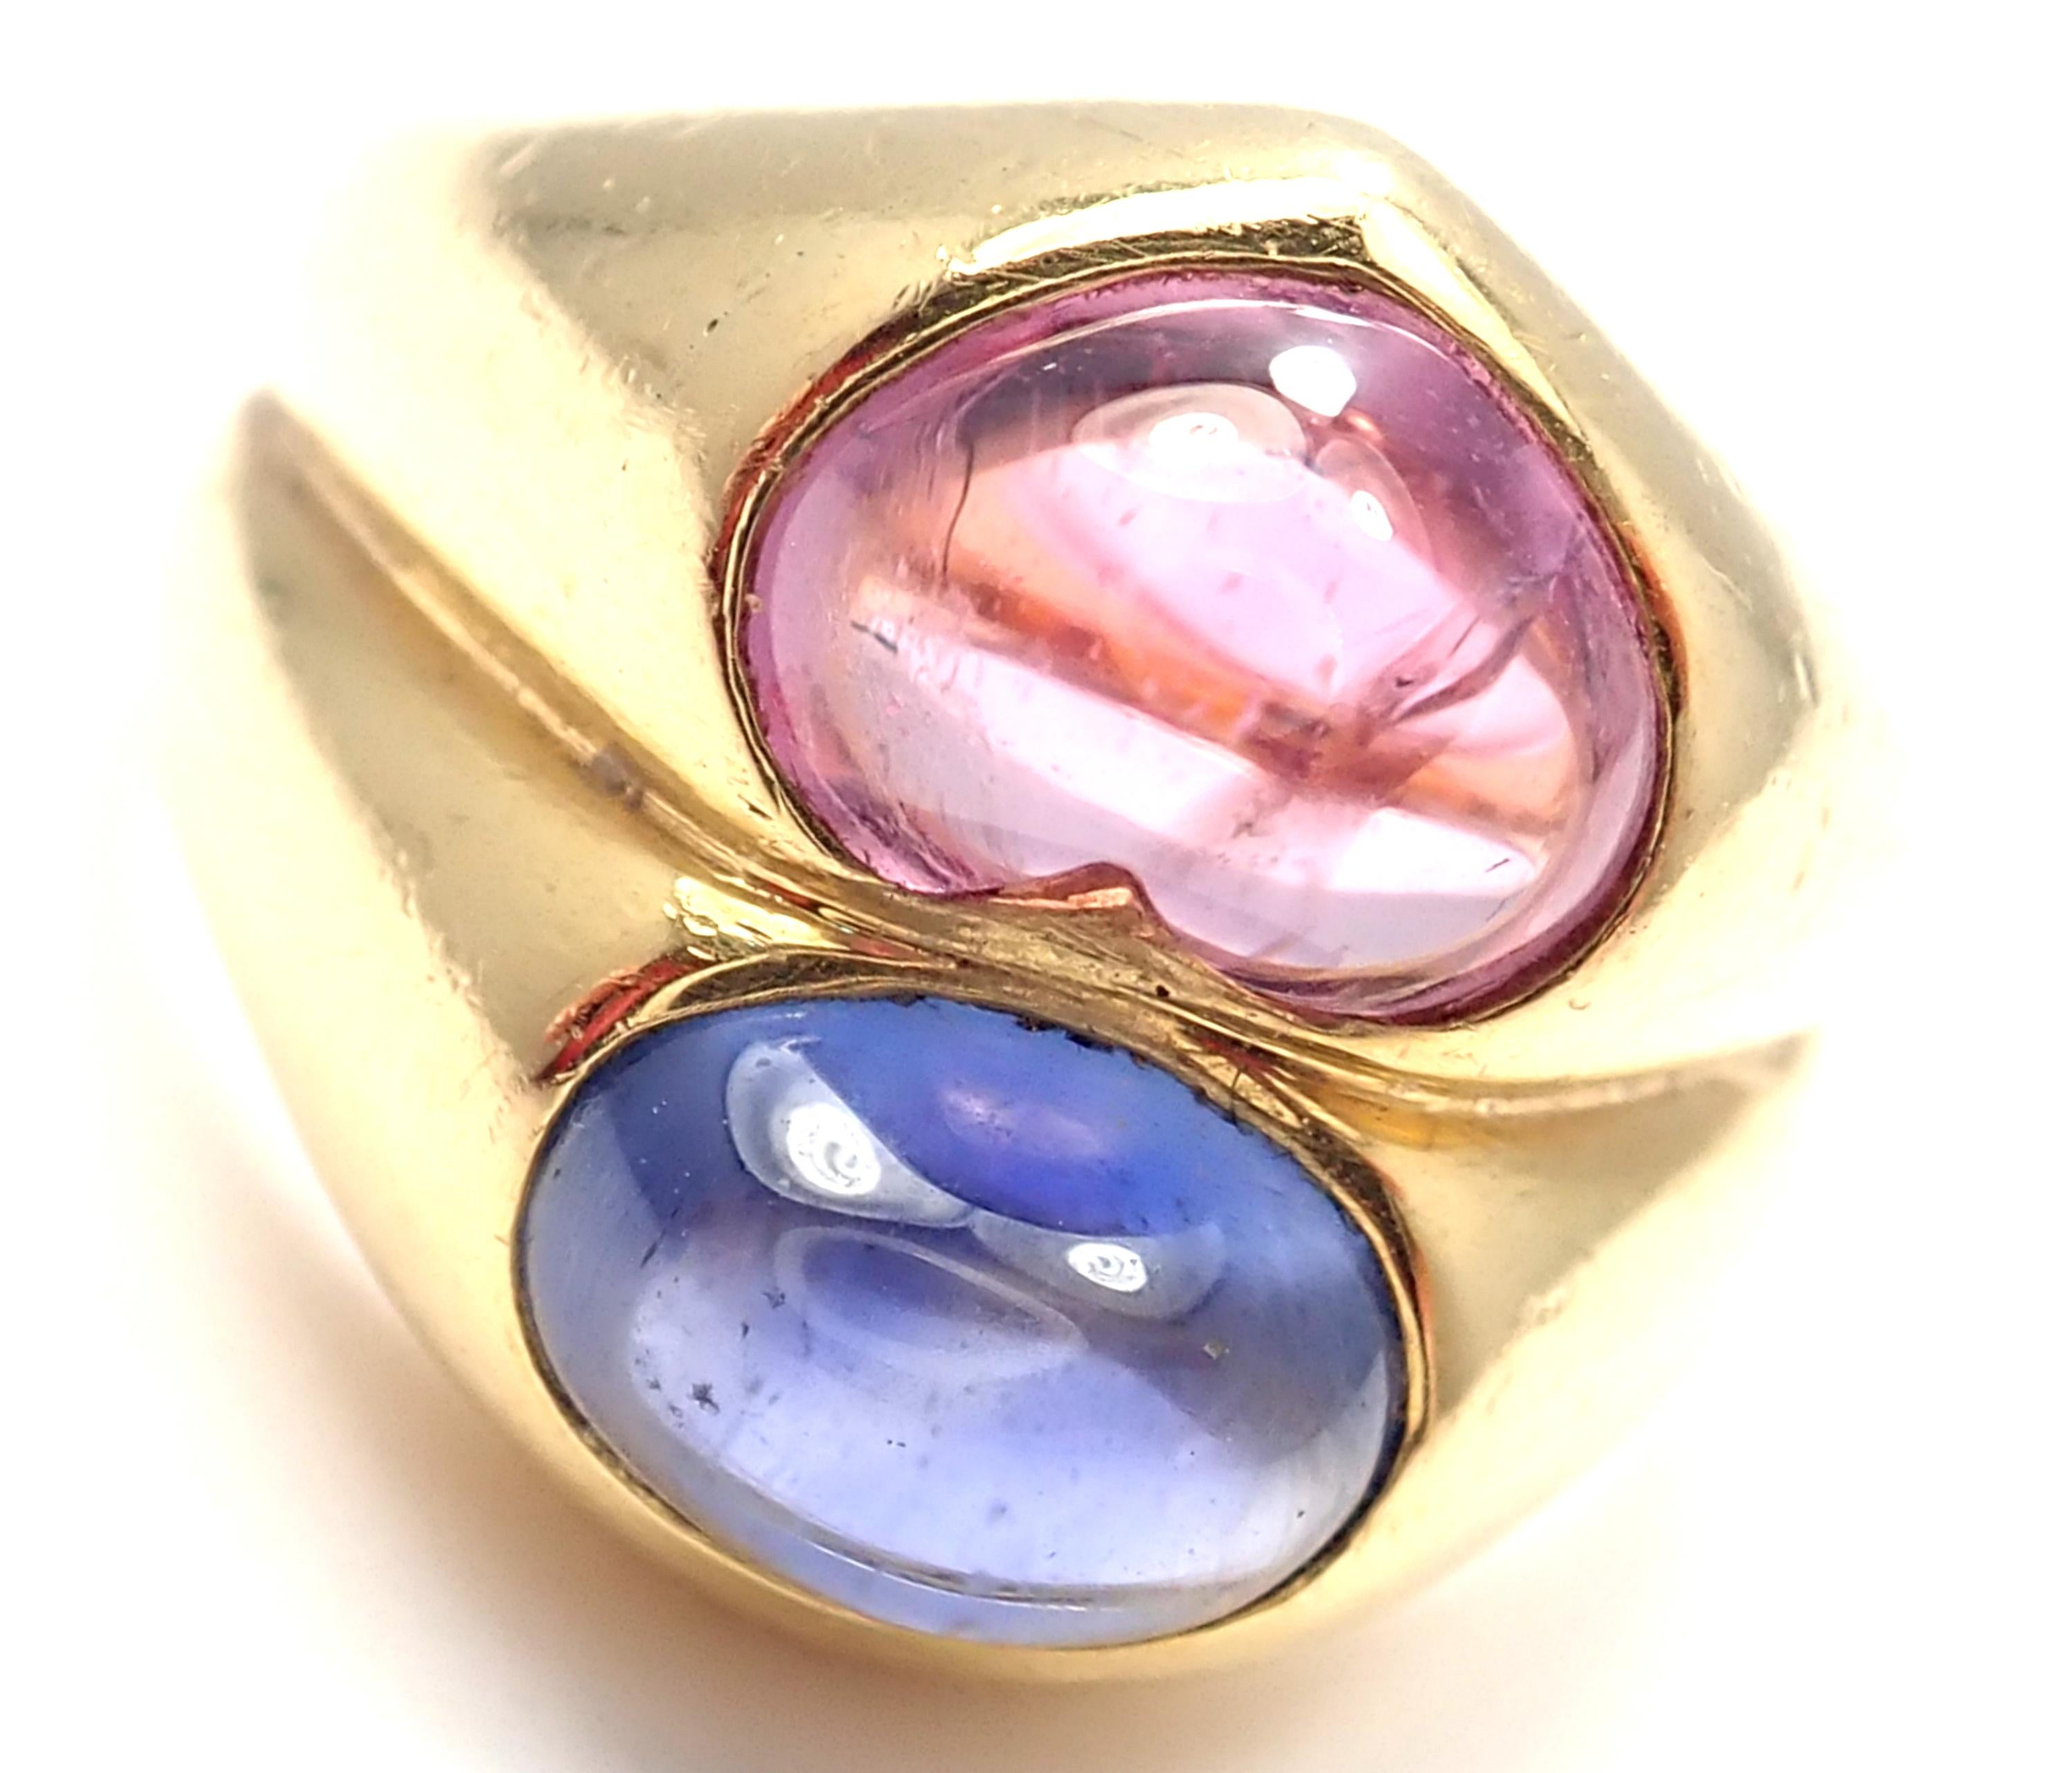 18k Yellow Gold Pink & Blue Sapphire Ring By Bulgari. 
With 1 Oval Shaped Blue Sapphires 
And Heart Shaped Pink Sapphire
5mm x 8mm
Pink Sapphire 2.30ct
Blue Sapphire 2.11ct
Details:
Size: 5.5 (Resize Available)
Weight: 14.4 grams
Width: 15mm
Stamped